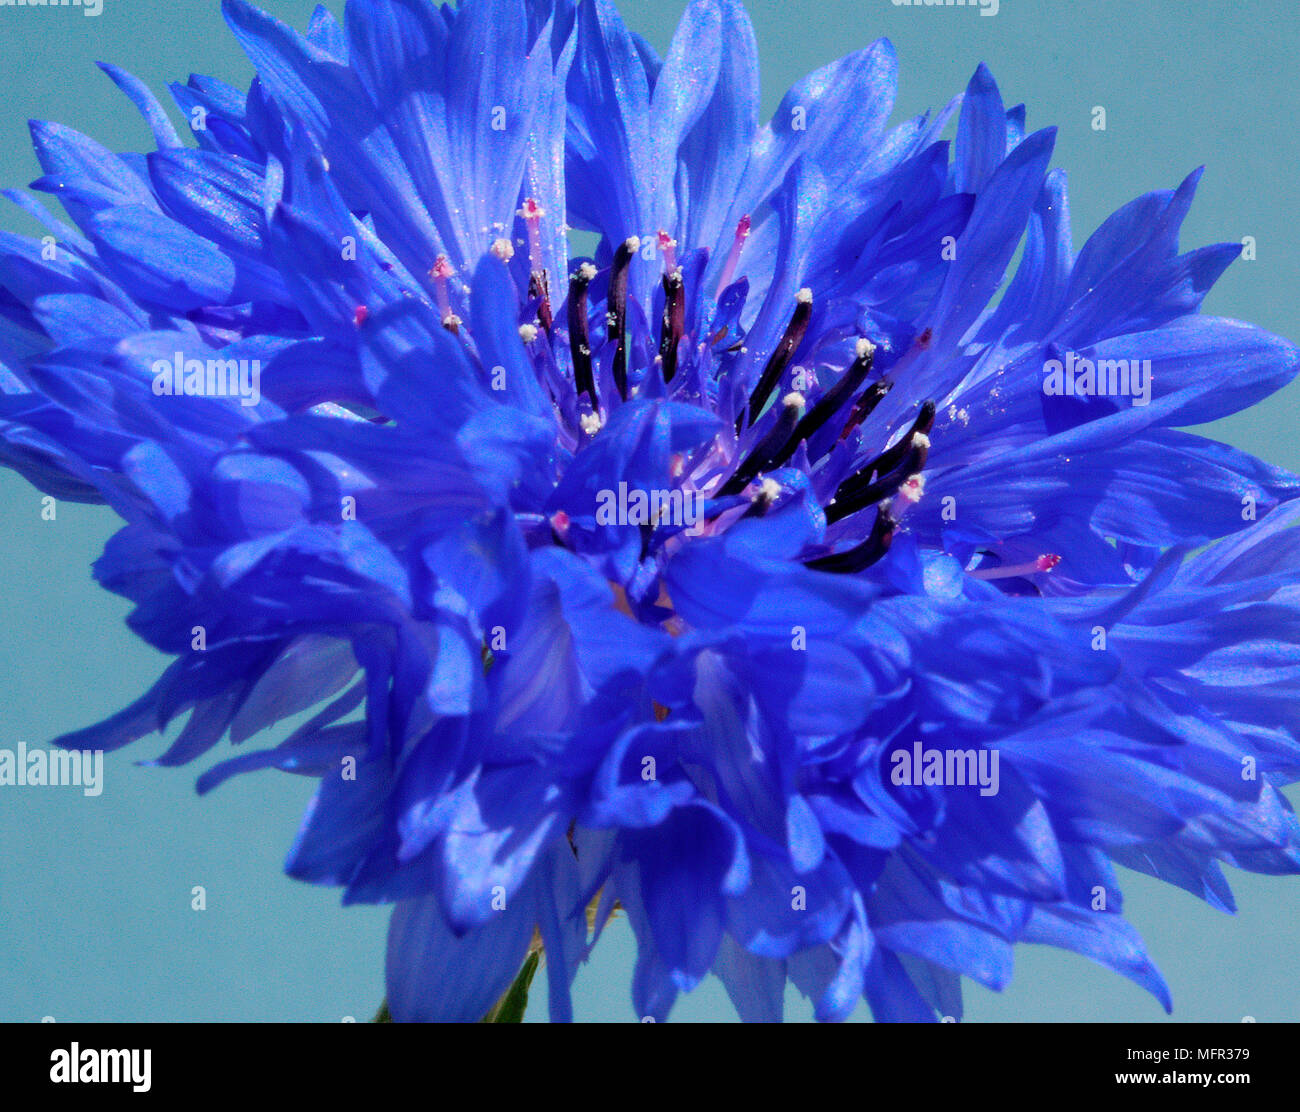 Bright blue cornflower close-up against a blue background, showing the dark stamens. Stock Photo